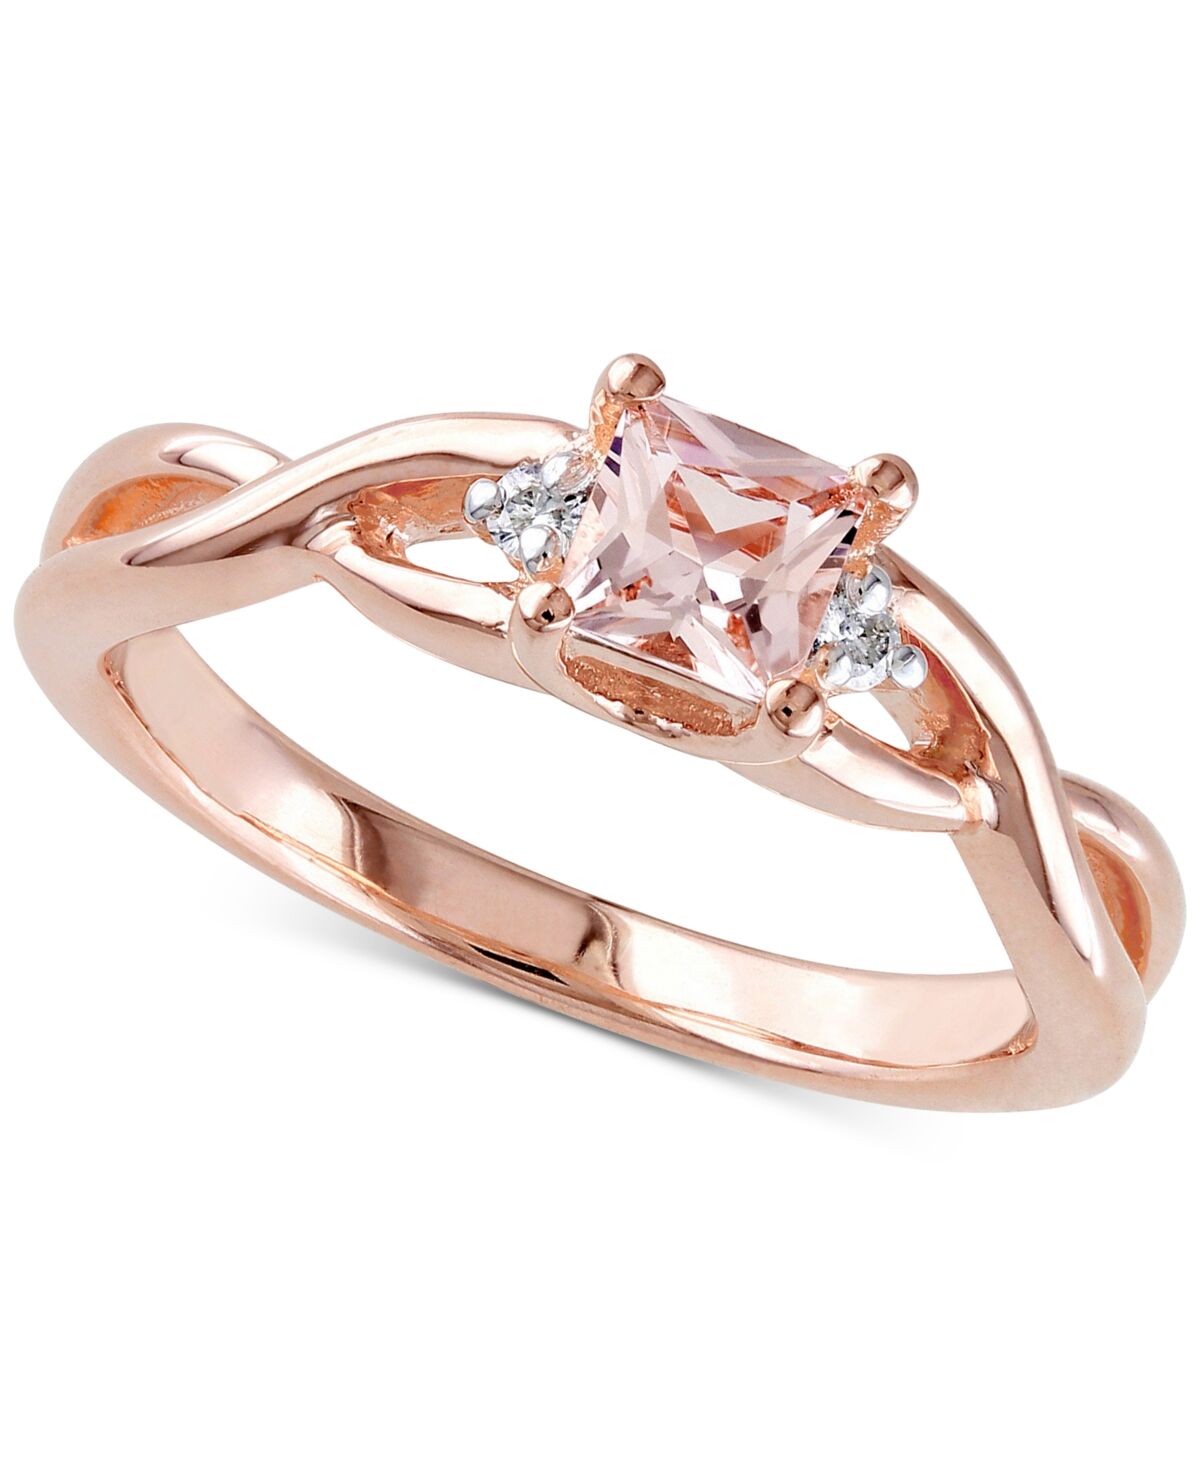 Macy's Morganite (1/3 ct. t.w.) & Diamond Accent Braided Shank Ring in 18k Rose Gold-Plated Sterling Silver - Morganite